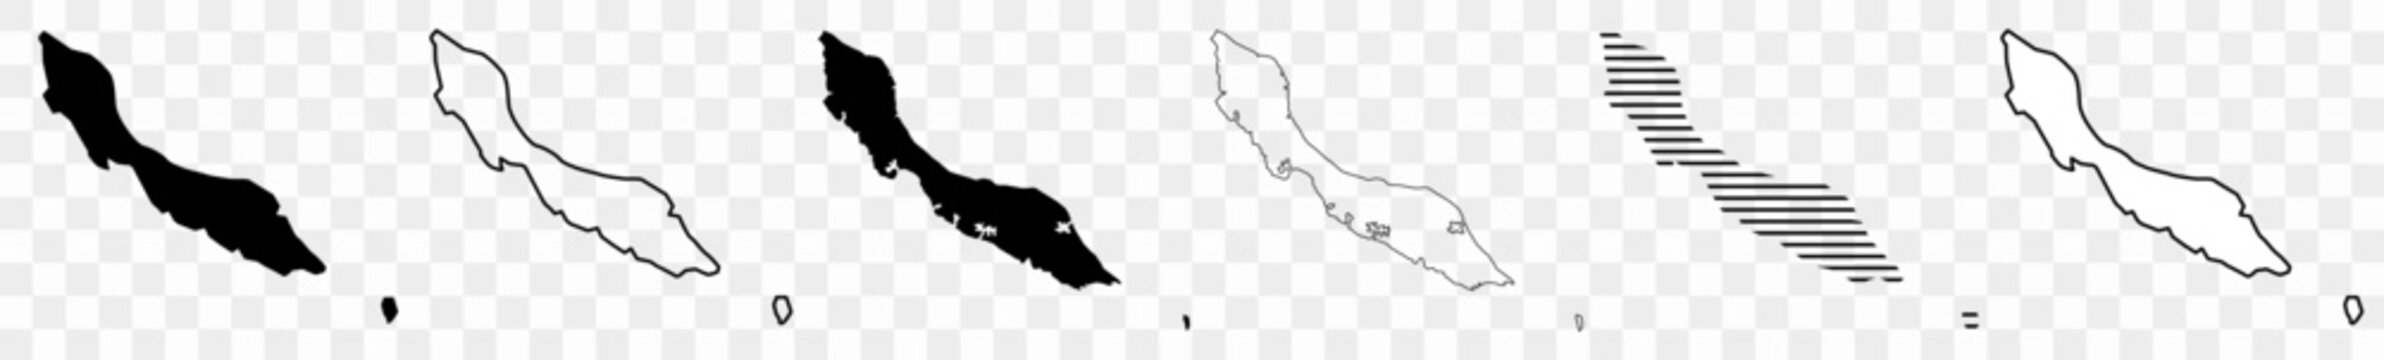 Curaçao Map Black | Curacao Border | State Country | Transparent Isolated | Variations